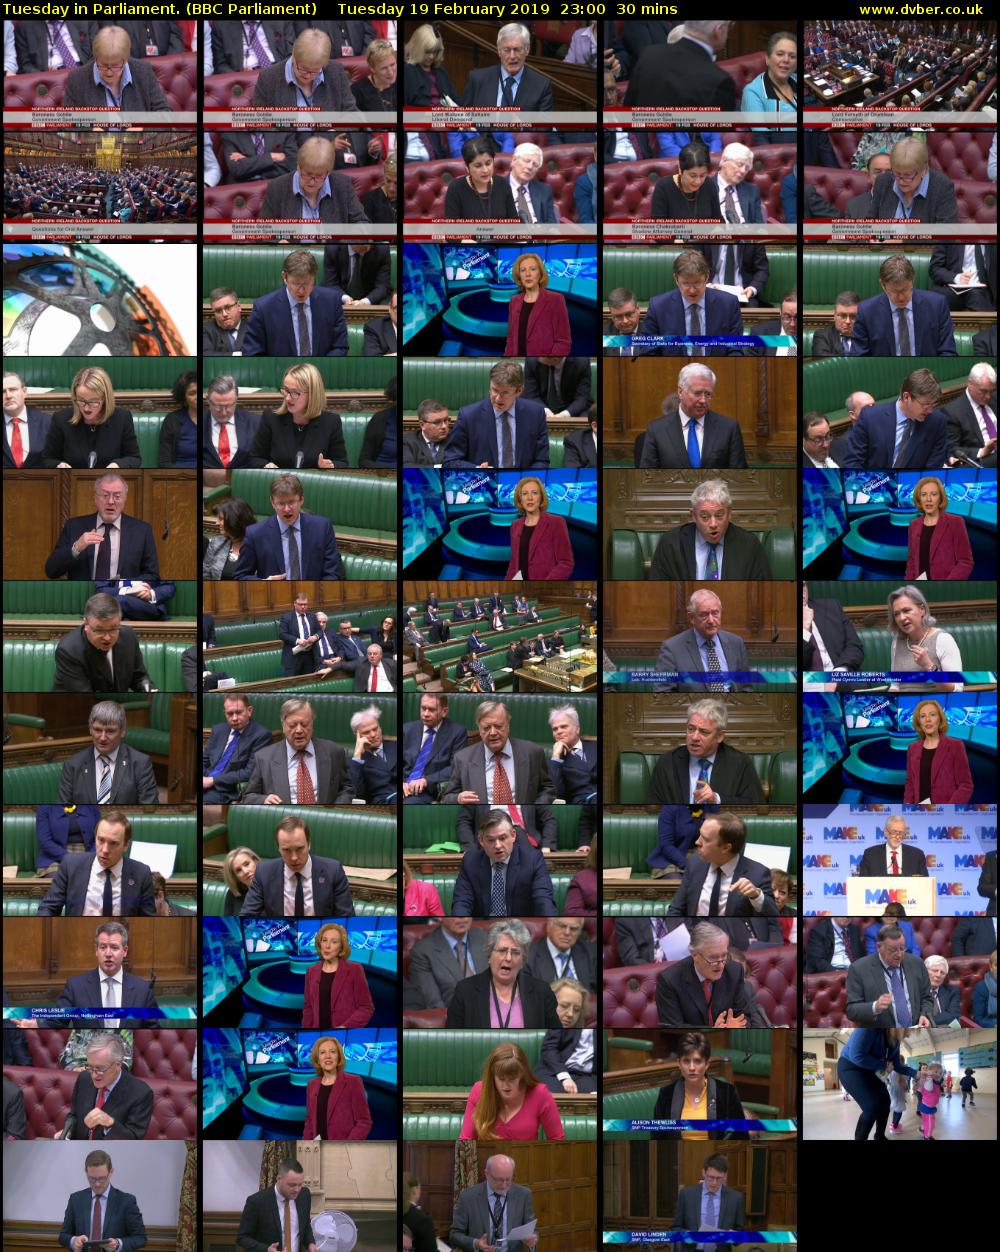 Tuesday in Parliament. (BBC Parliament) Tuesday 19 February 2019 23:00 - 23:30